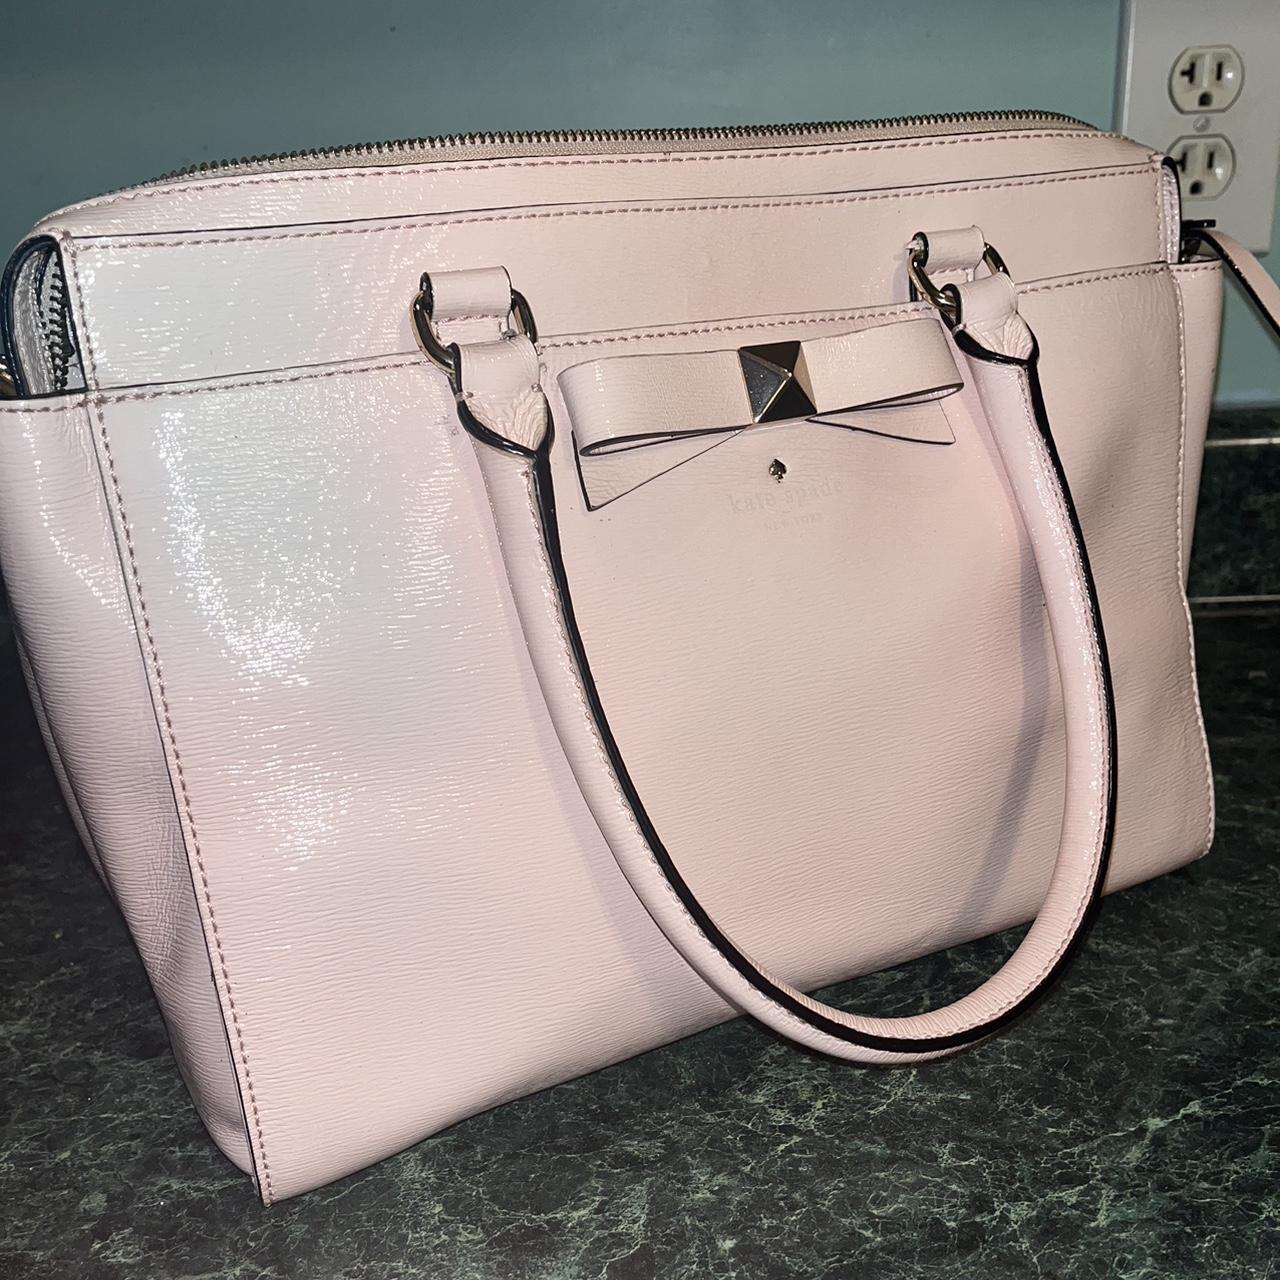 Bags | Authentic Pink Coach Big Tote Purse | Poshmark